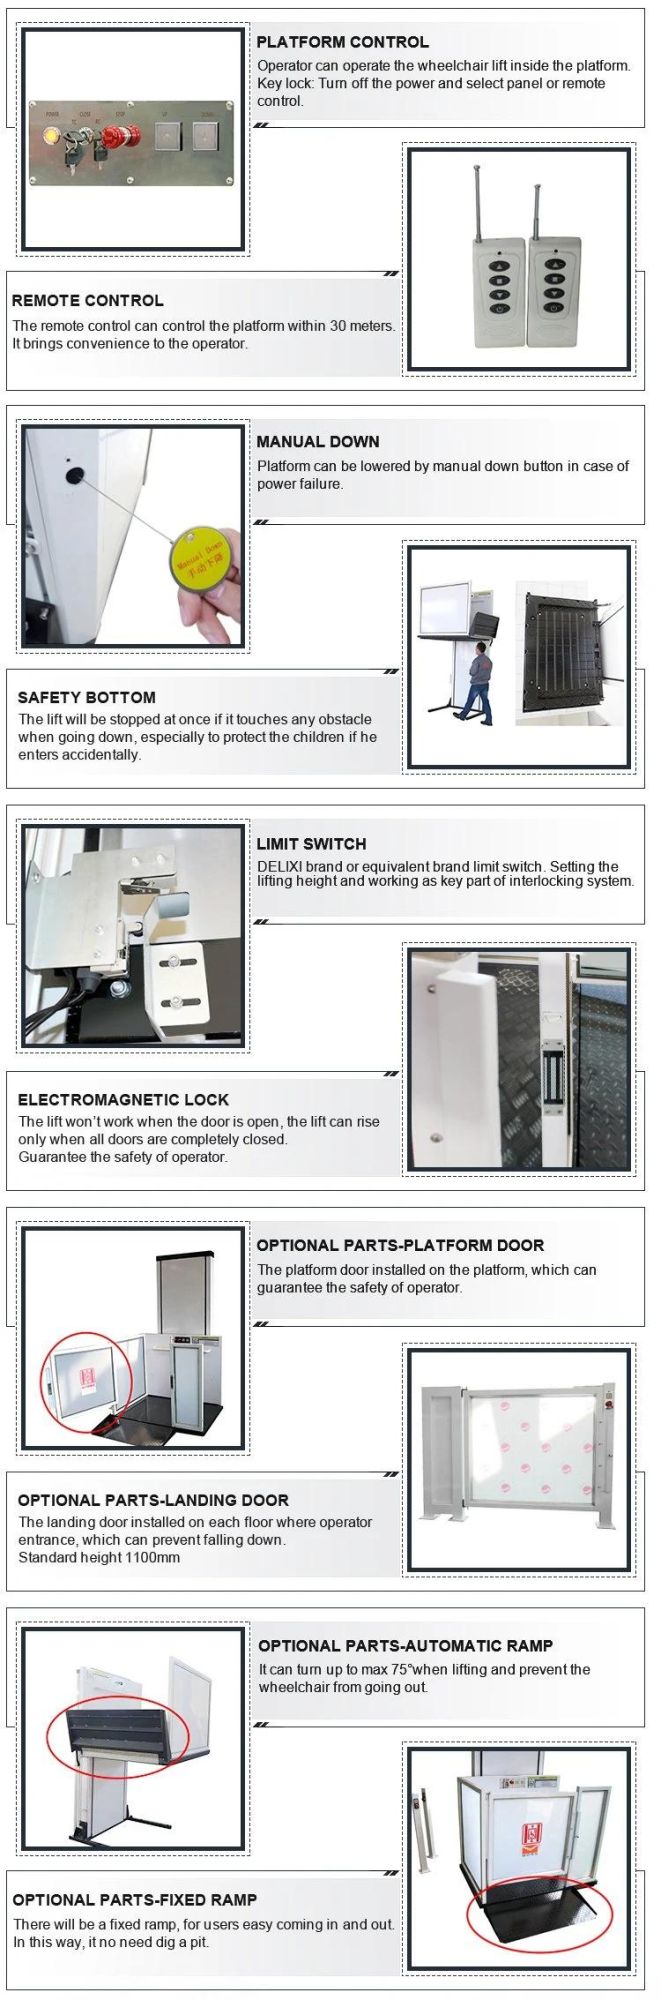 Morn Brand 7m Hydraulic Vertical Residential Elevator Platform Wheelchair Lifts for Buildings